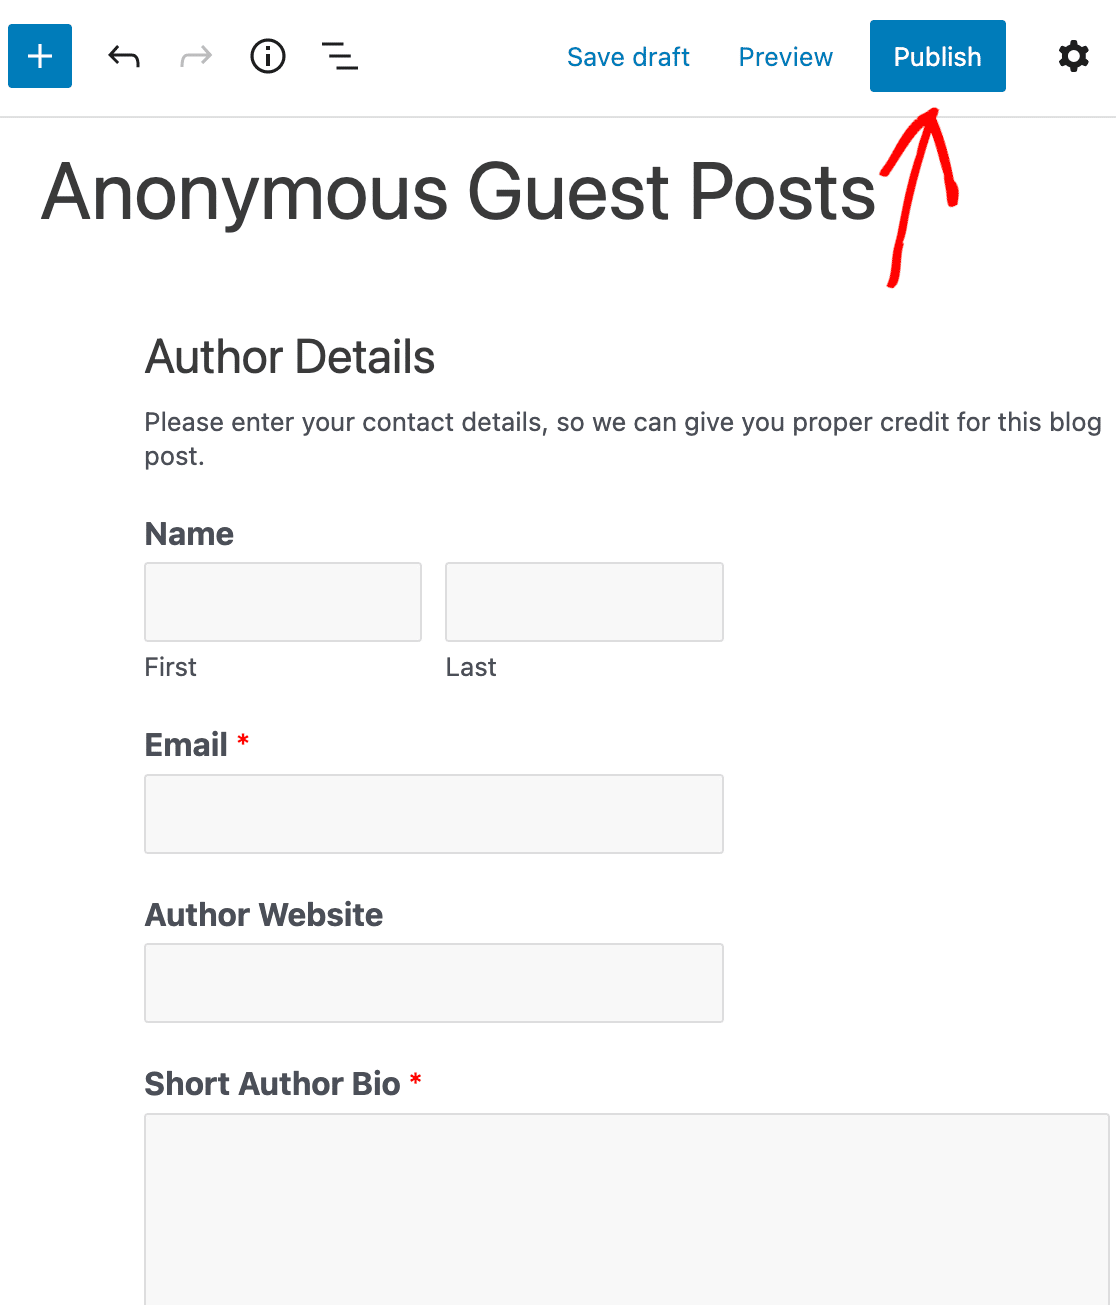 Publishing your anonymous guest post form